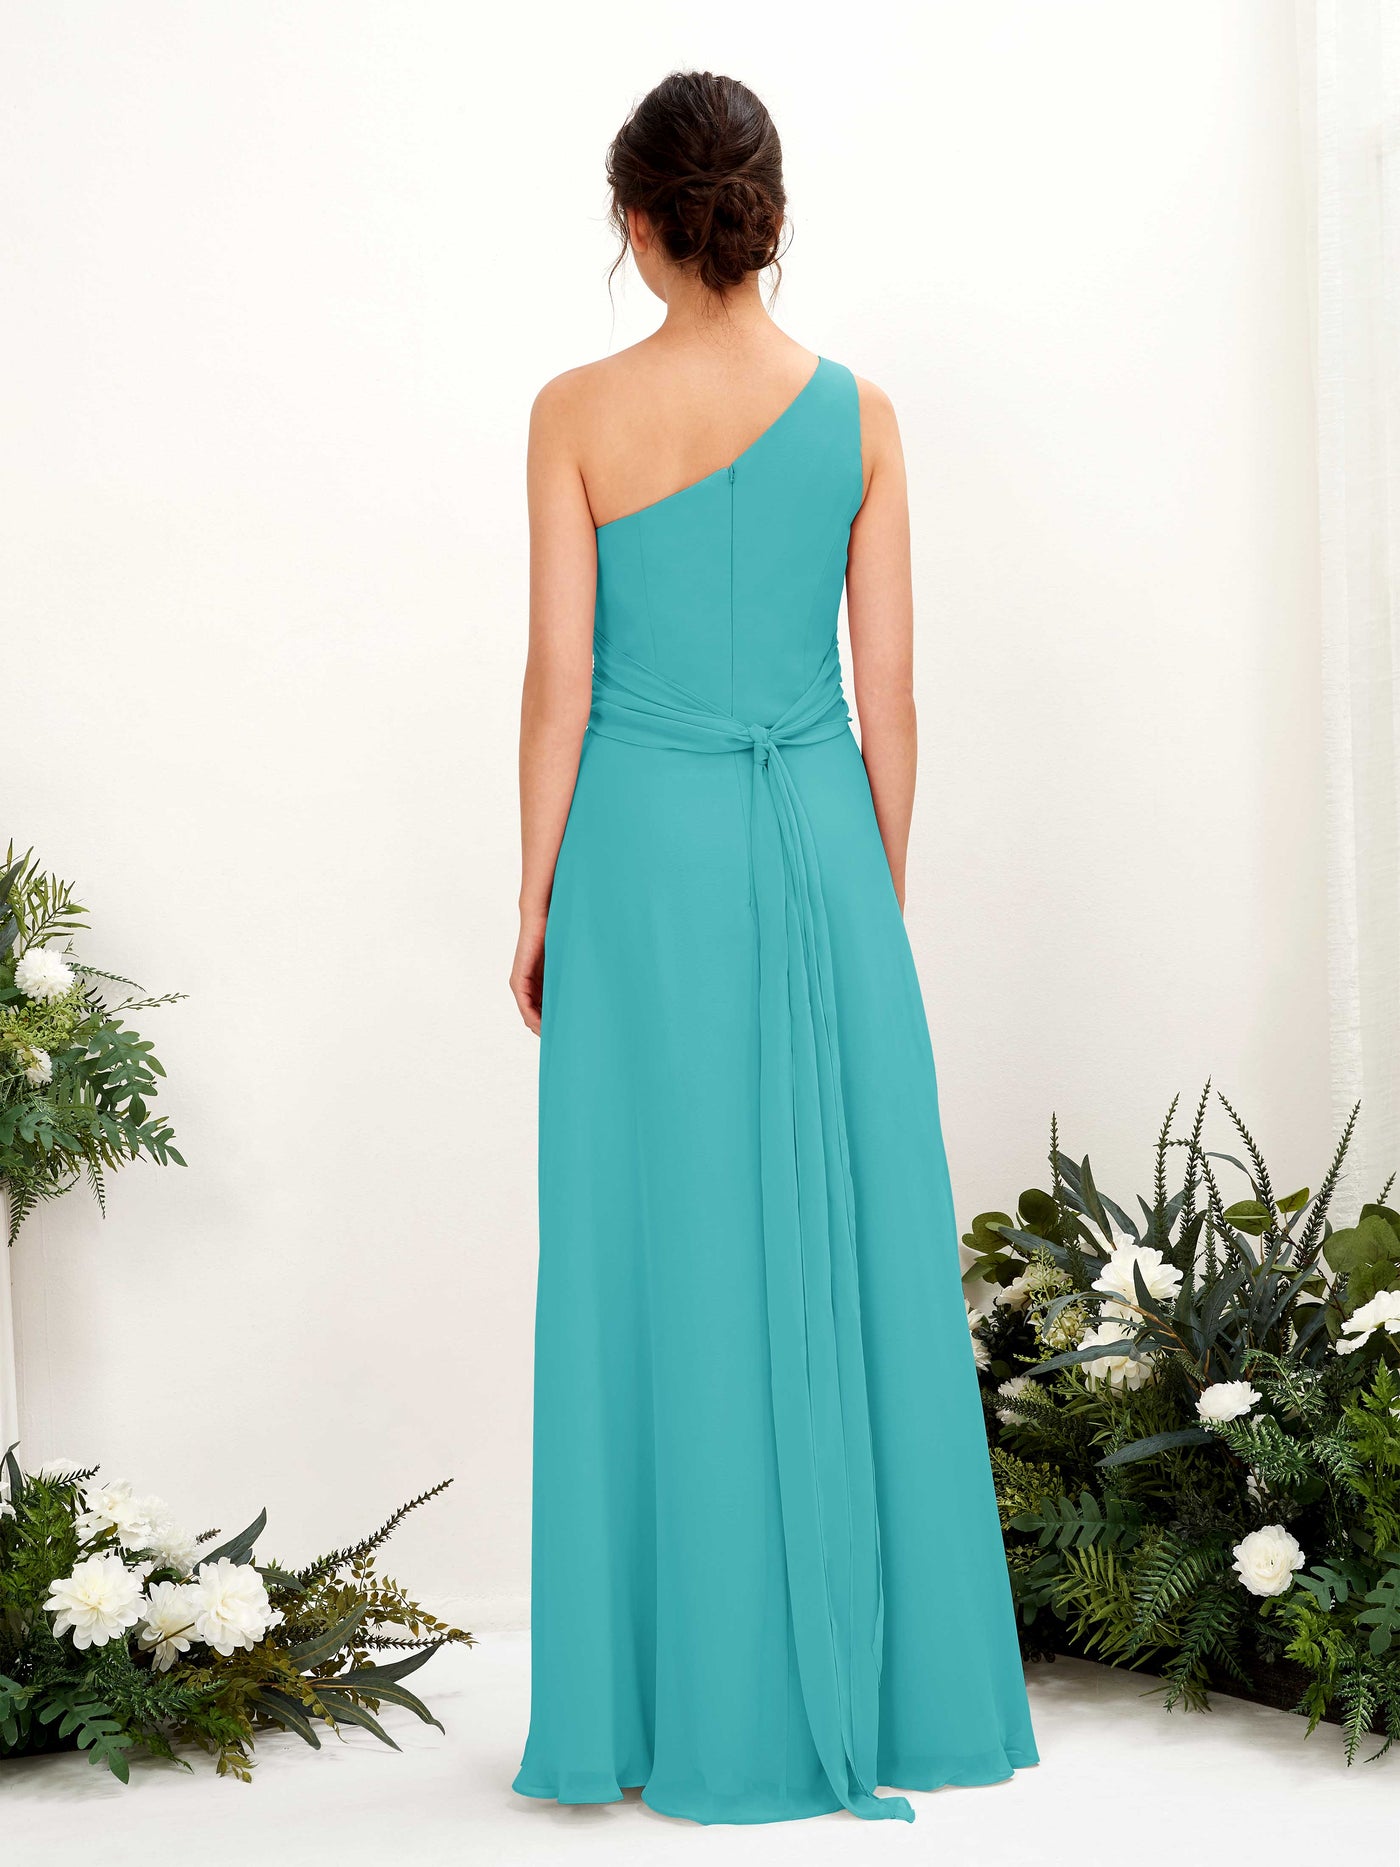 Turquoise Bridesmaid Dresses Bridesmaid Dress A-line Chiffon One Shoulder Full Length Sleeveless Wedding Party Dress (81224723)#color_turquoise